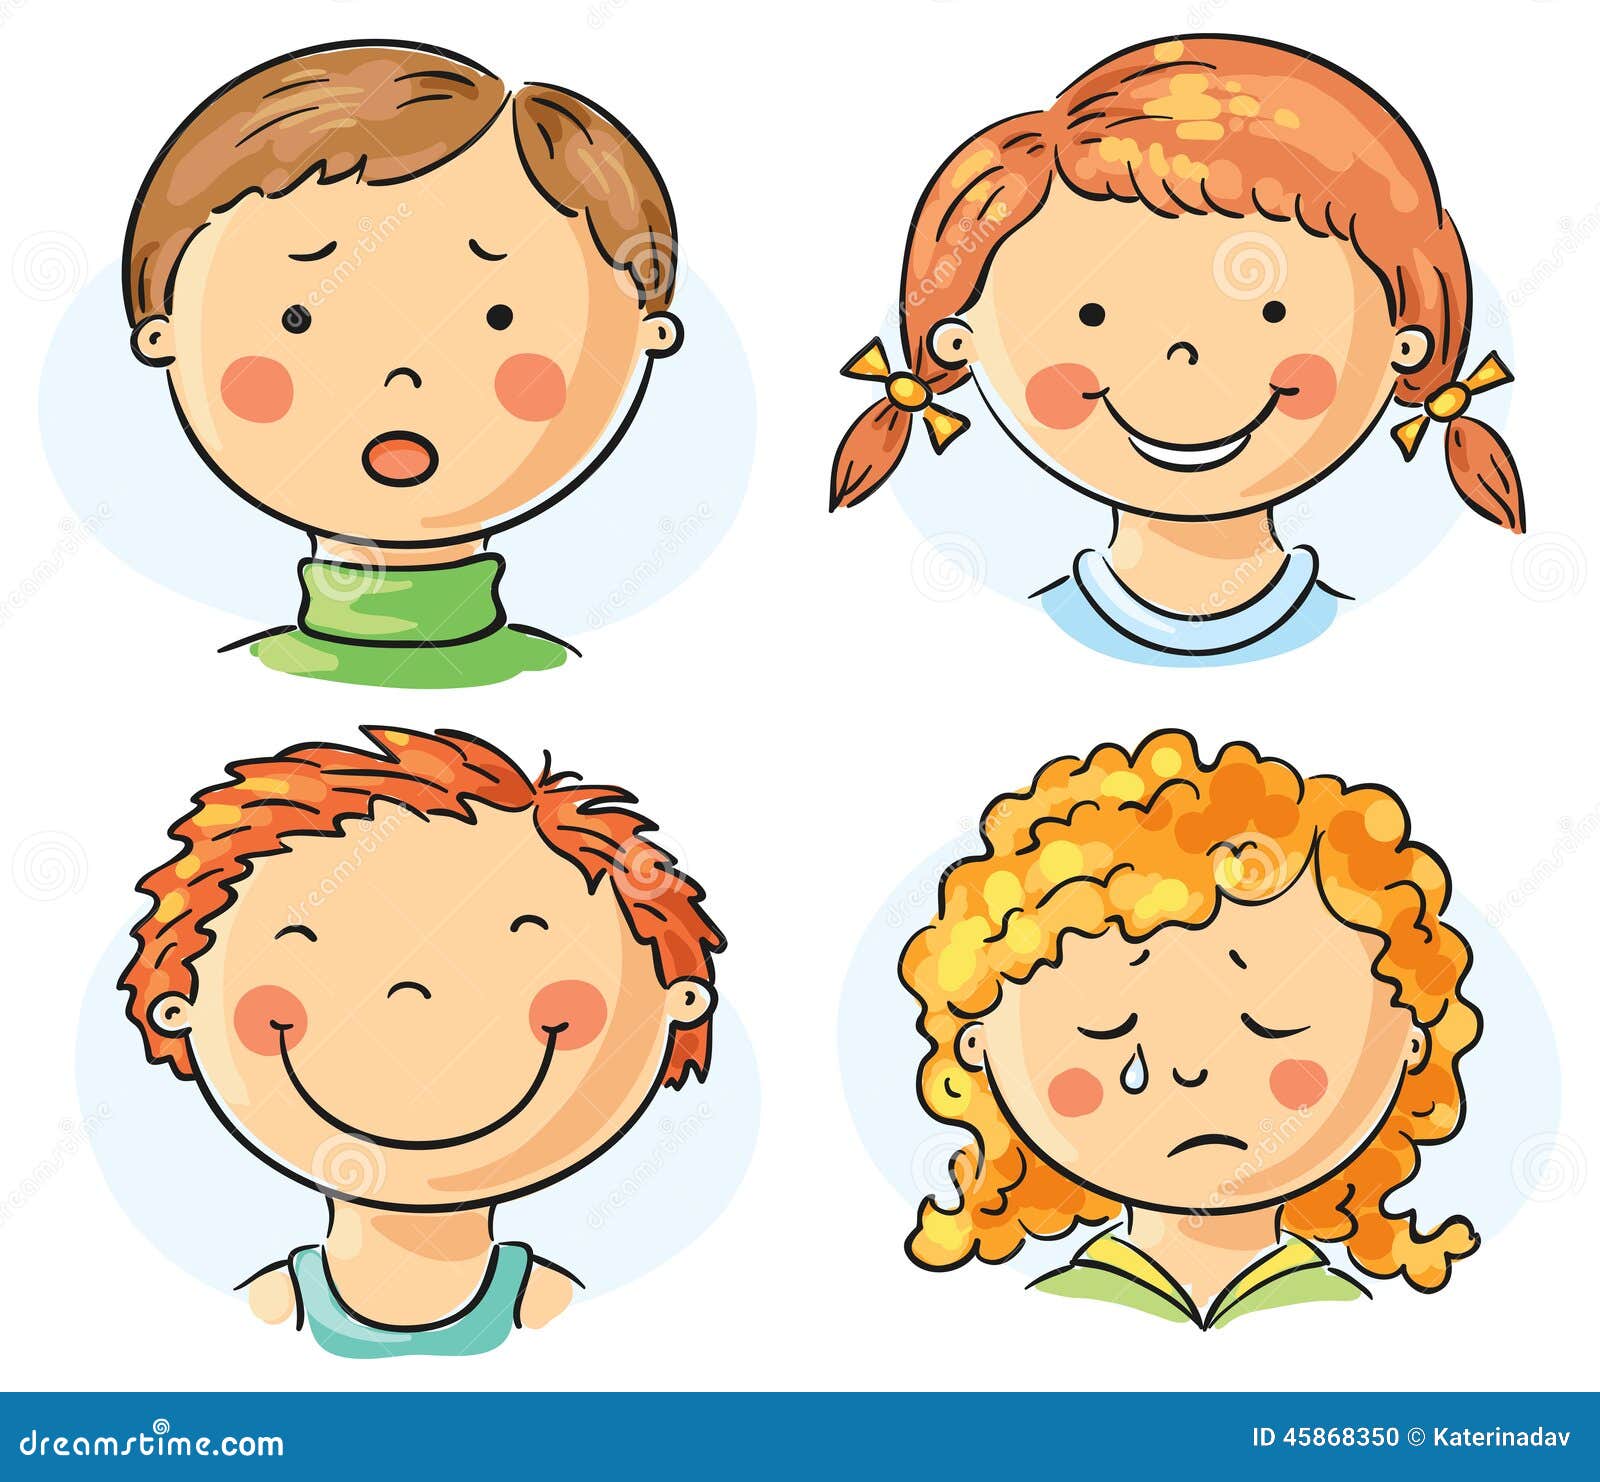 clip art showing emotions - photo #27